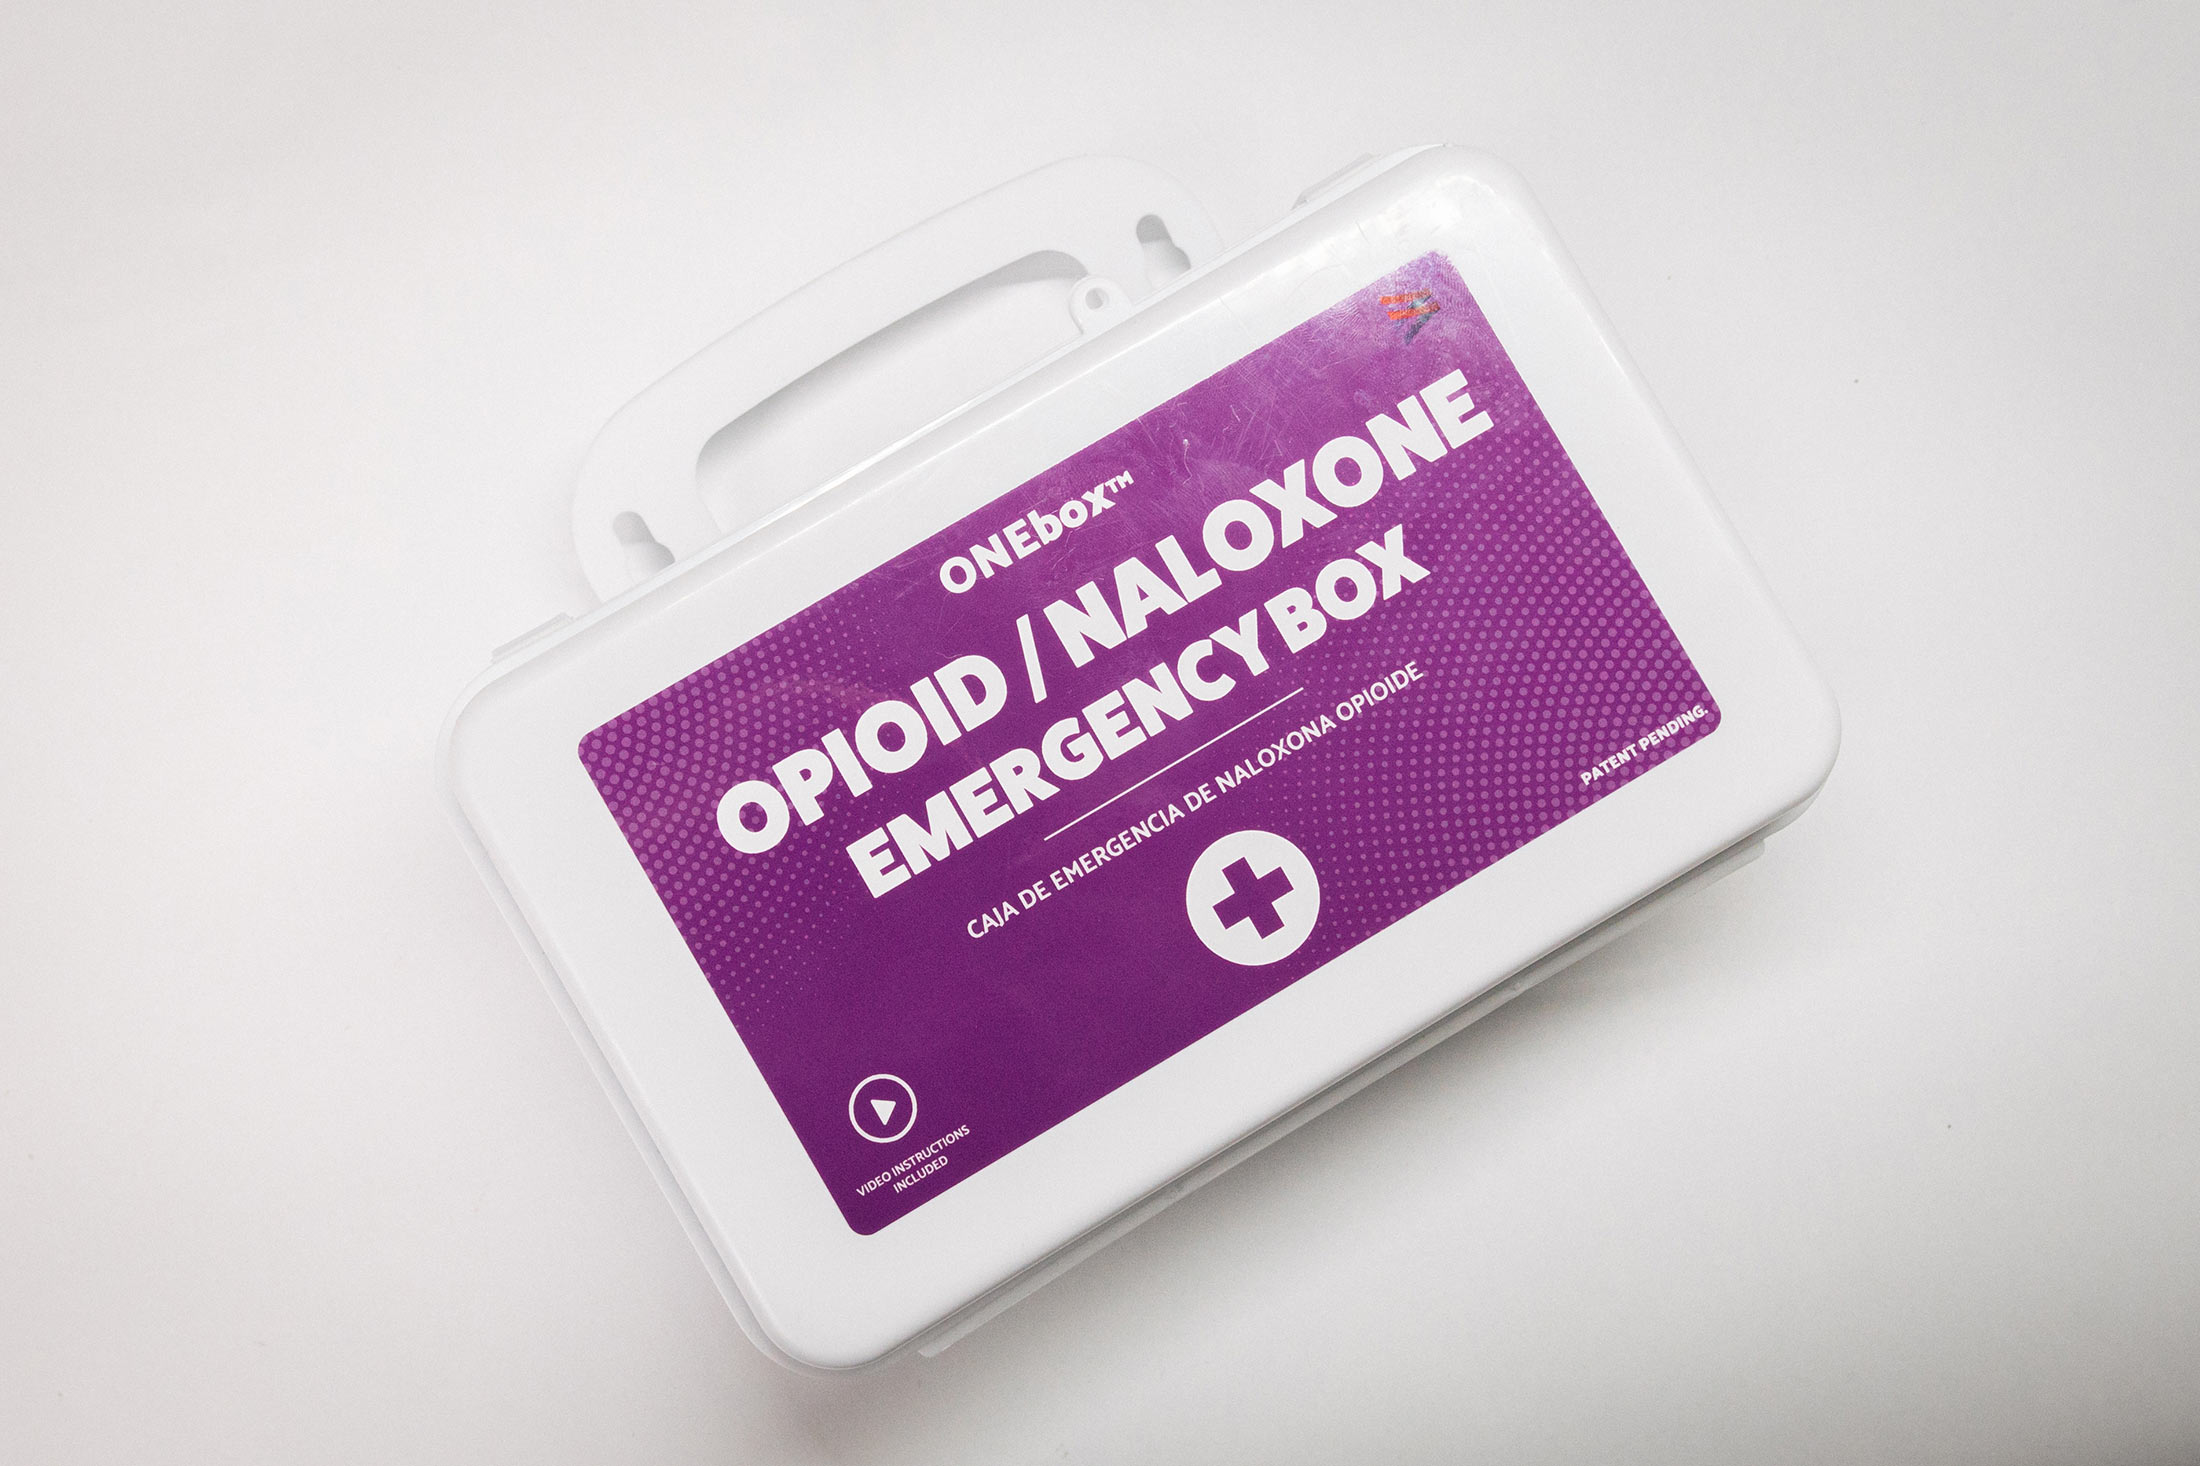 Onebox Opioid Overdose Kit Comes With Naloxone Instructions - Bloomberg